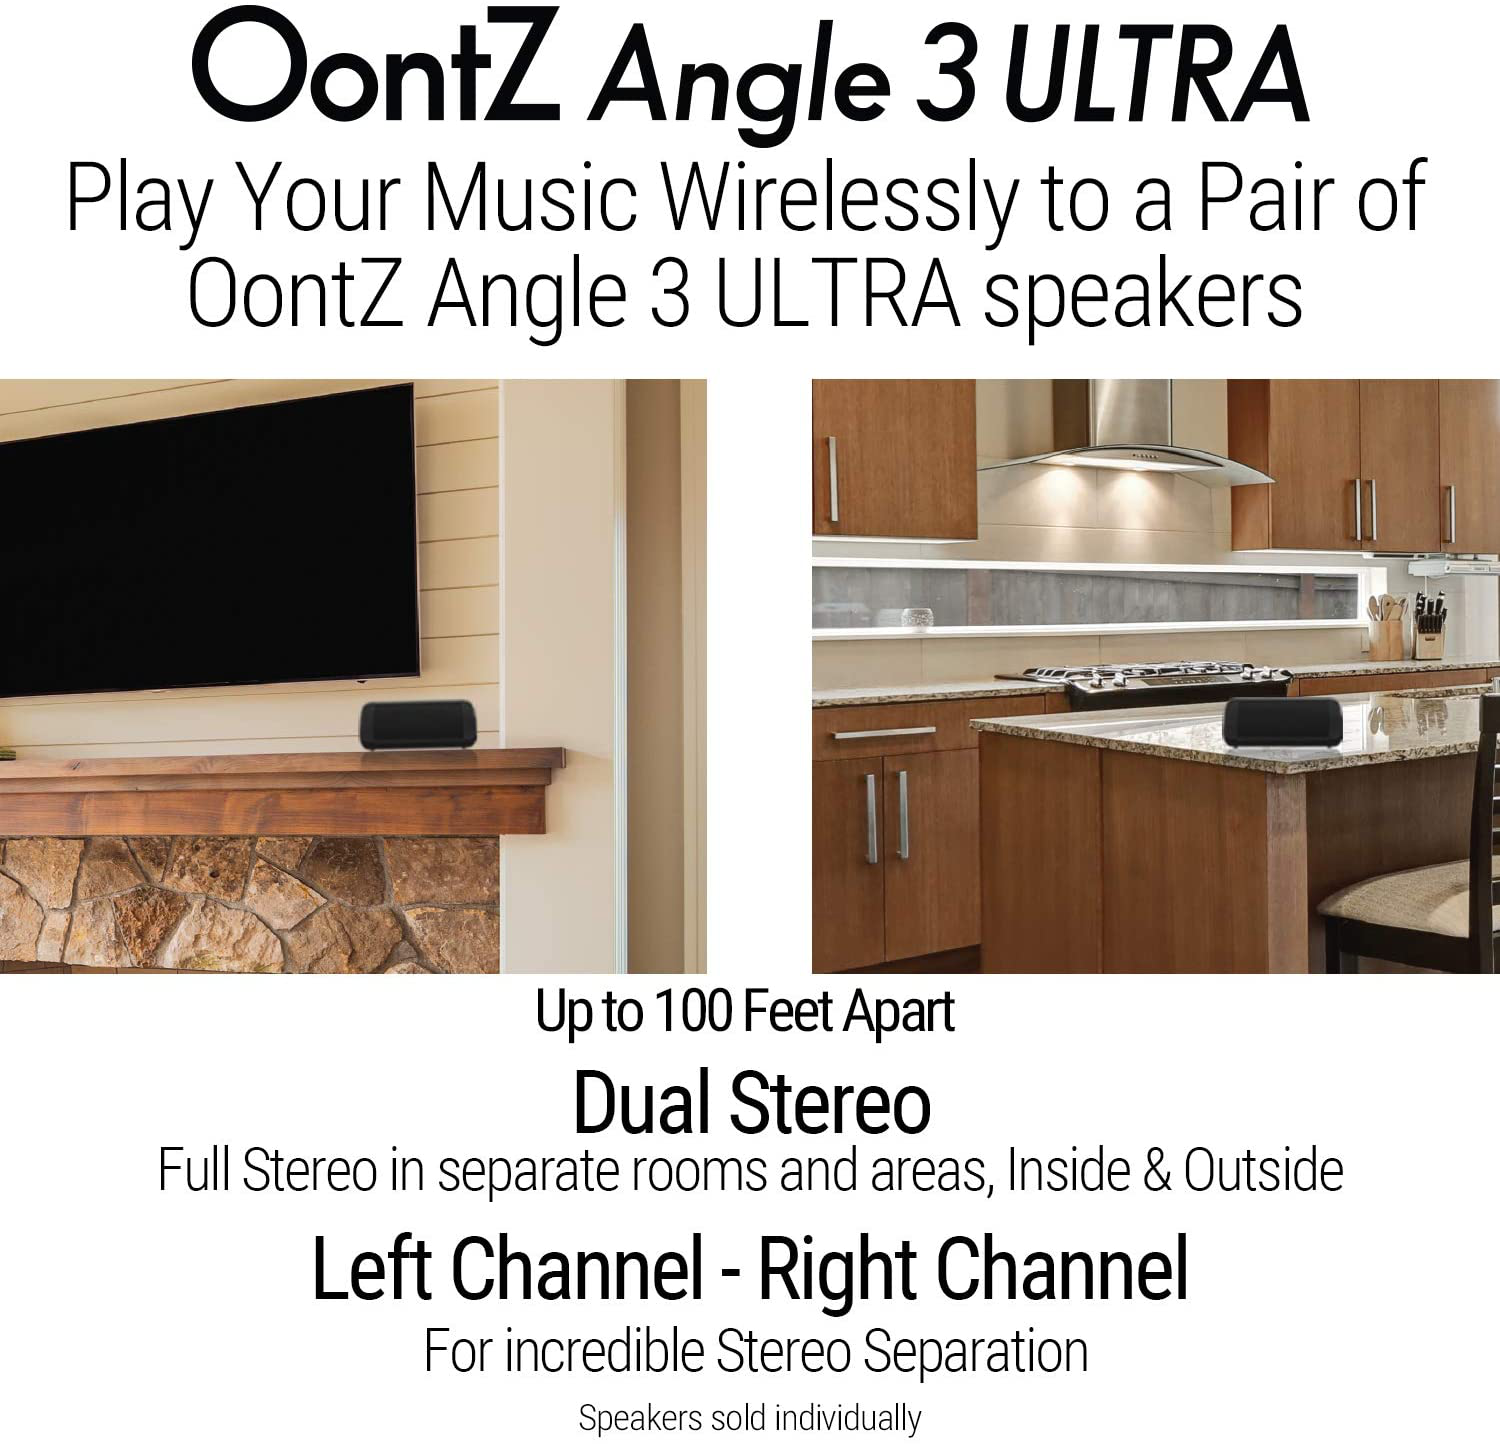 OontZ Angle 3 Ultra Waterproof 5.0 Bluetooth Speaker, 14 Watts, Hi-Quality Sound & Bass, 100 Ft Wireless Range, Play 2, 3 or More Speakers Together